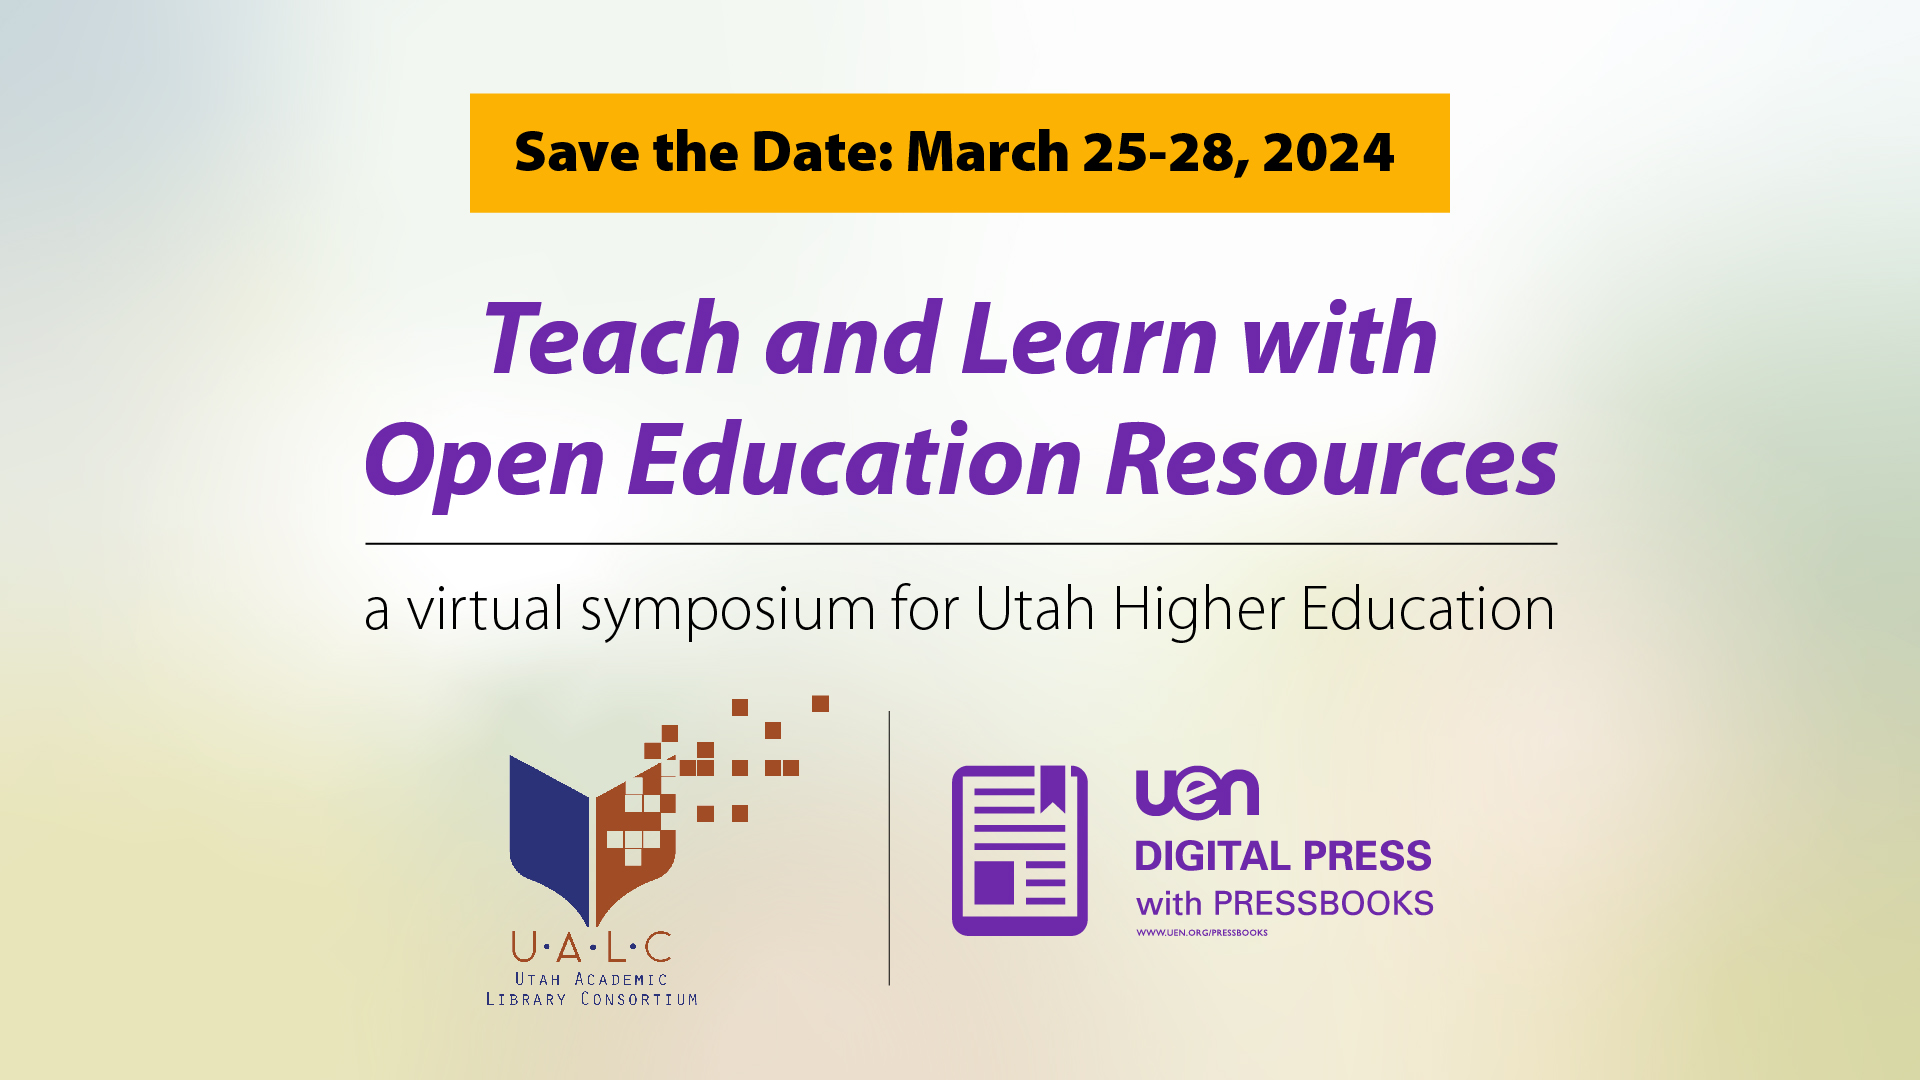 March 25-28, 2024 Teach & Learn with Open Education Resources a virtual symposium for Utah Higher Education